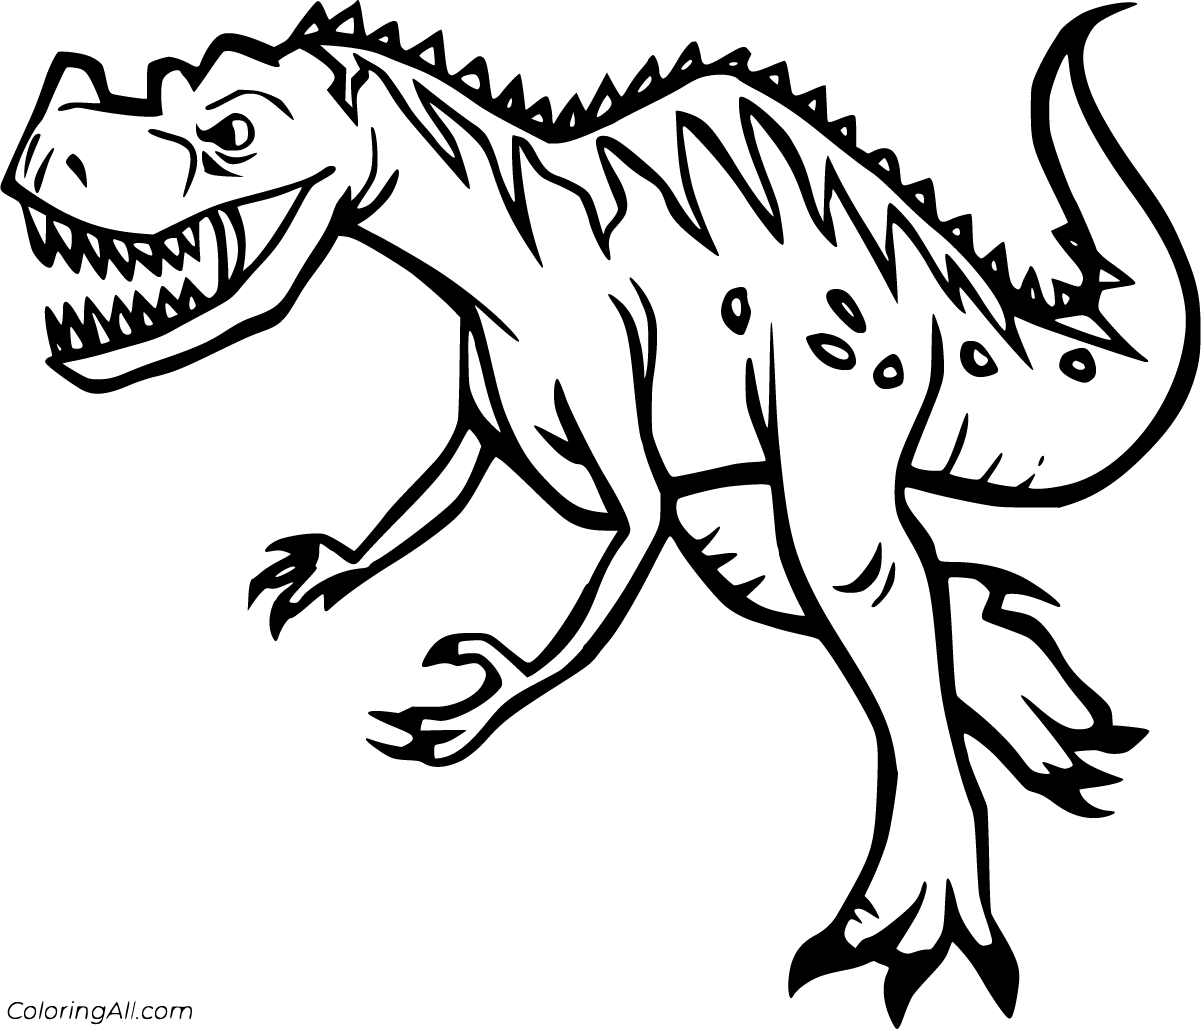 Giganotosaurus Coloring Pages - ColoringAll